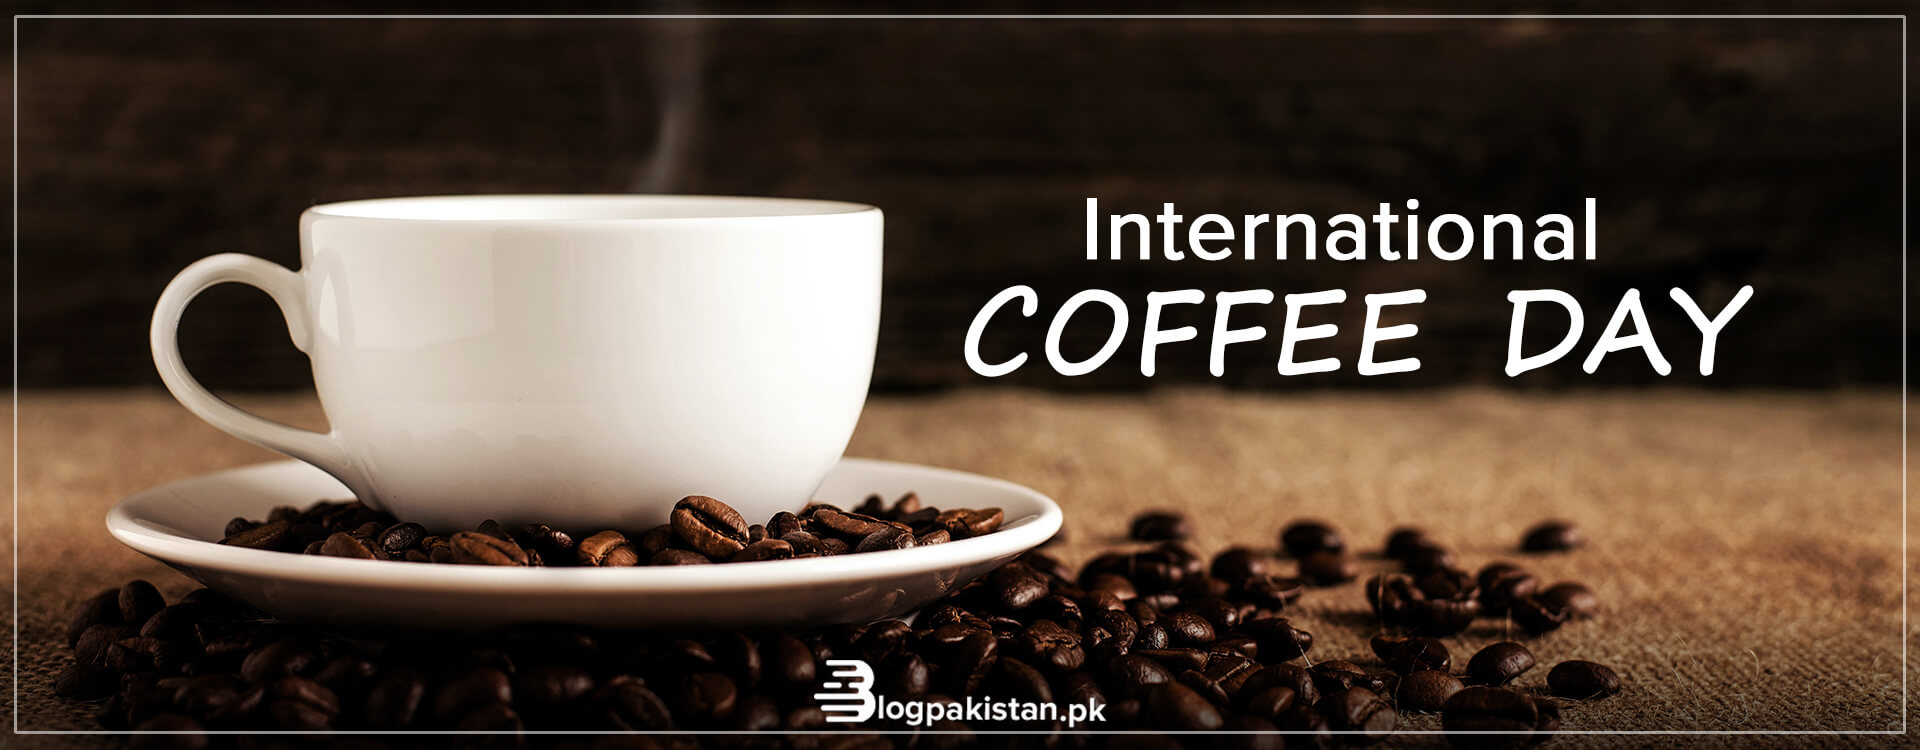 International Coffee Day: Date and Reason of Celebration Every Year